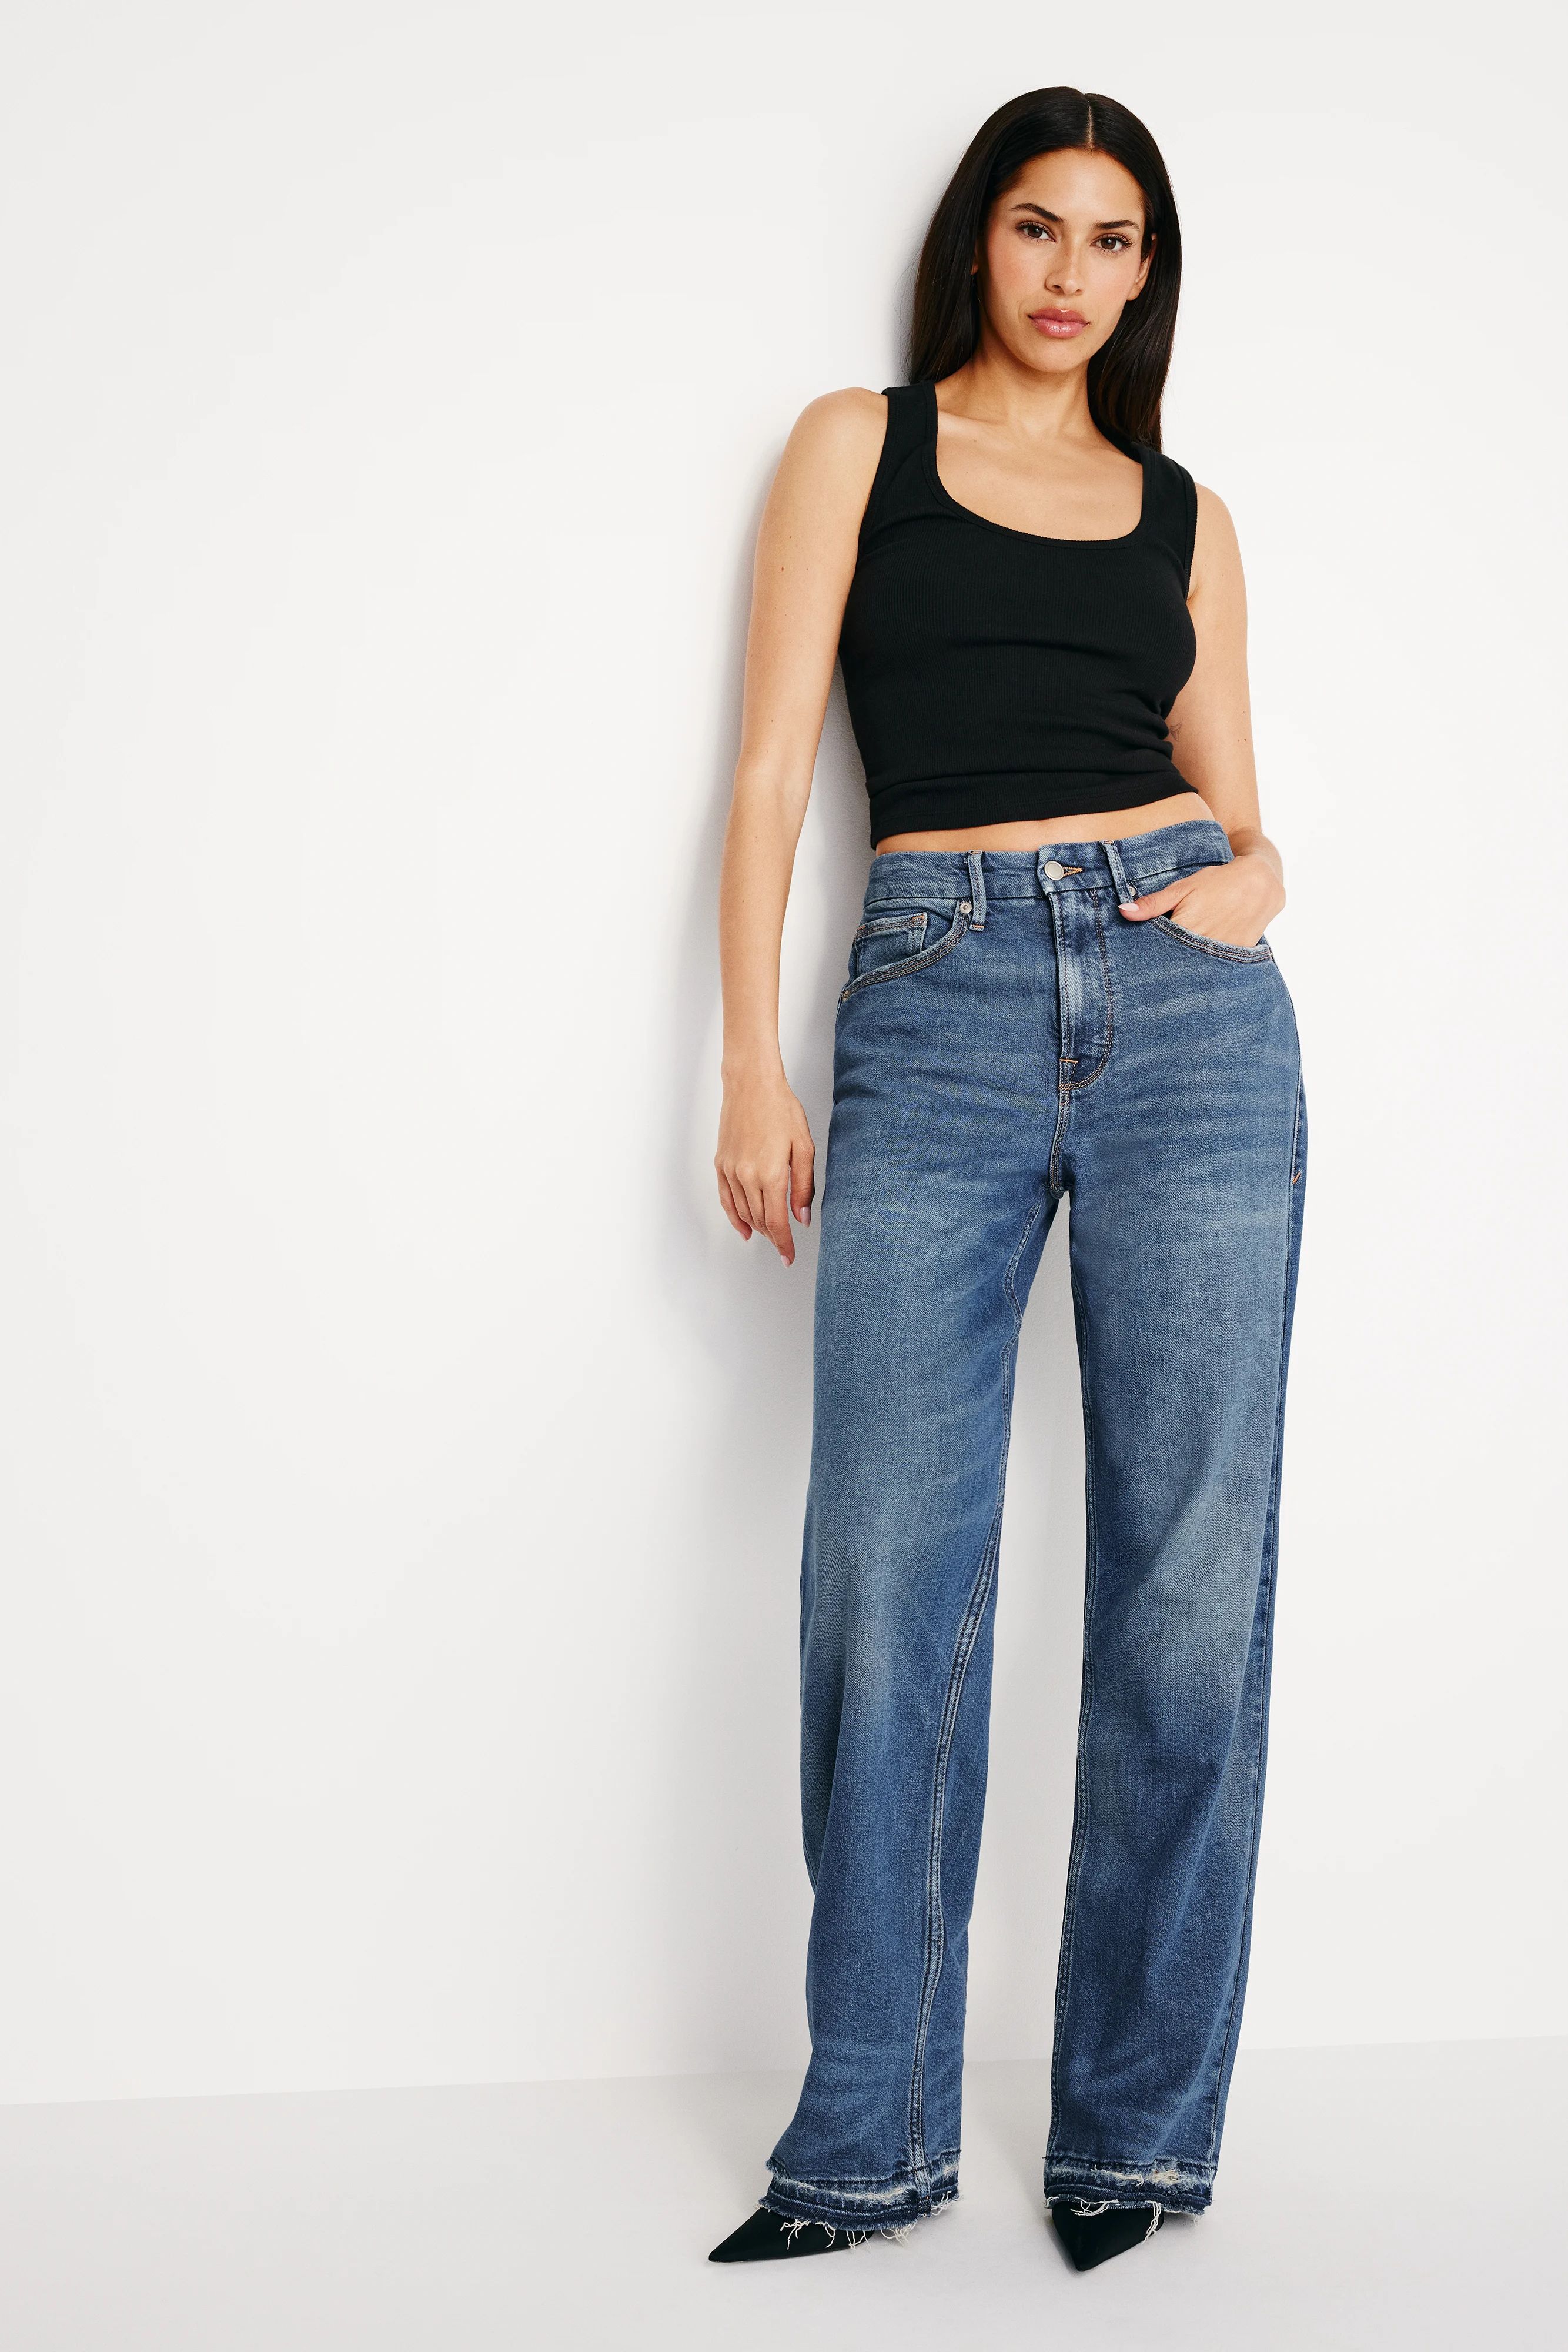 GOOD '90s RELAXED JEANS | INDIGO605 - GOOD AMERICAN | Good American